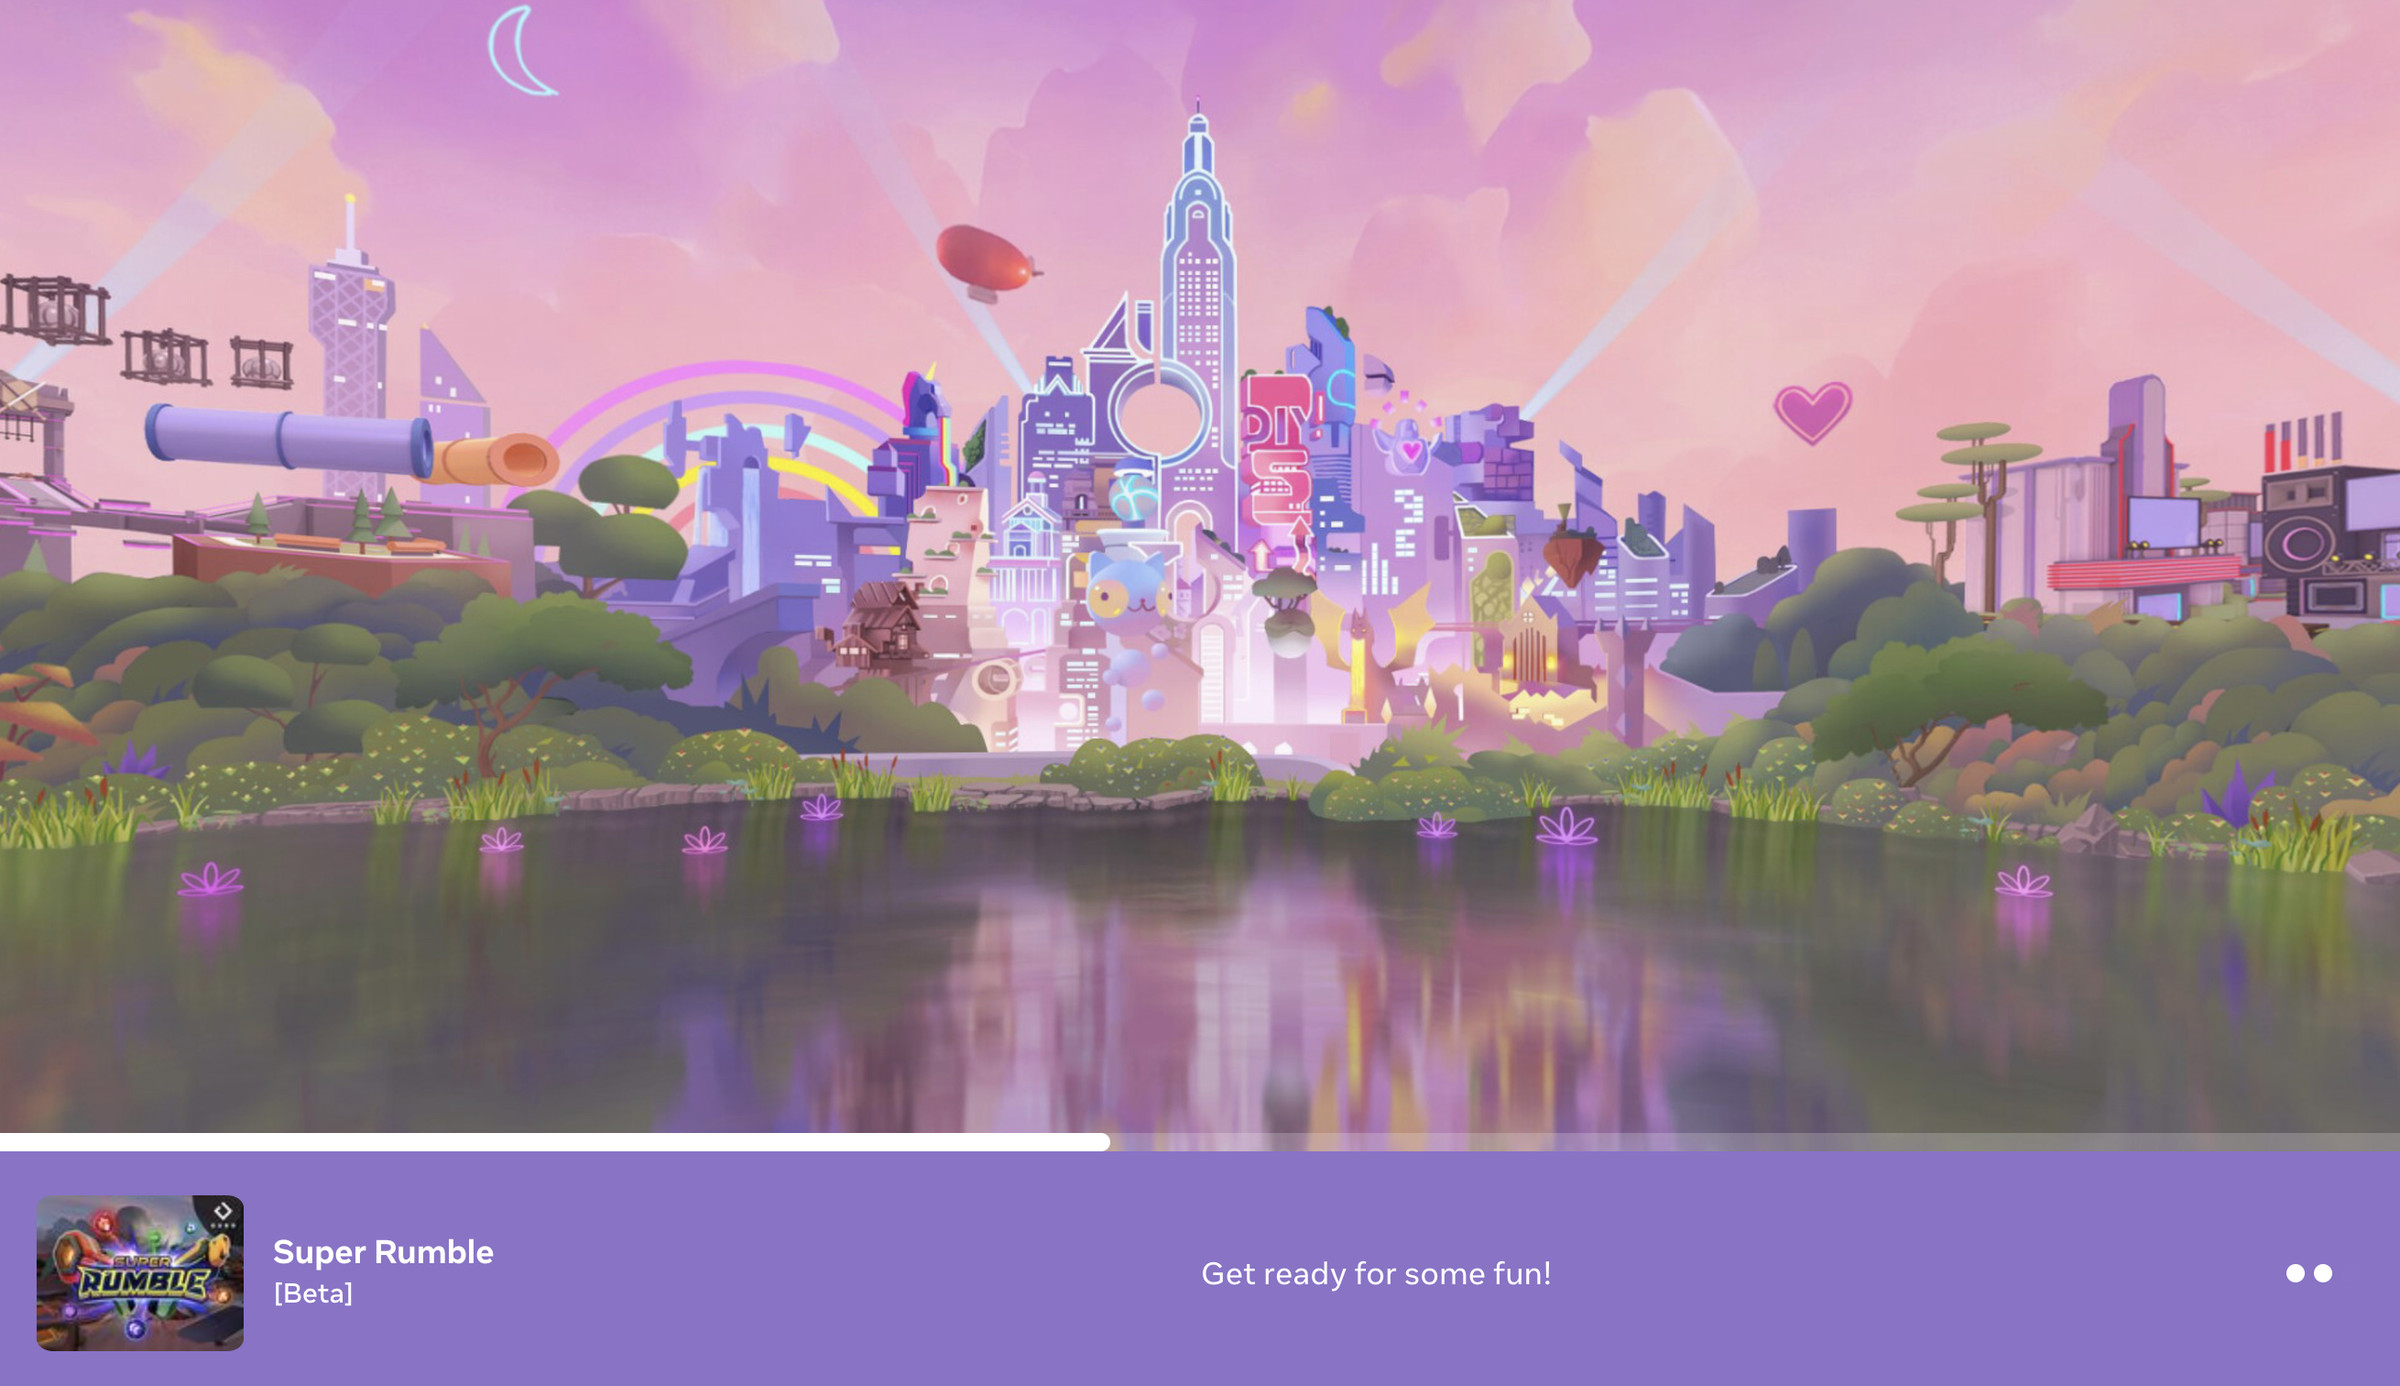 The loading screen for Horizon Worlds on the web.